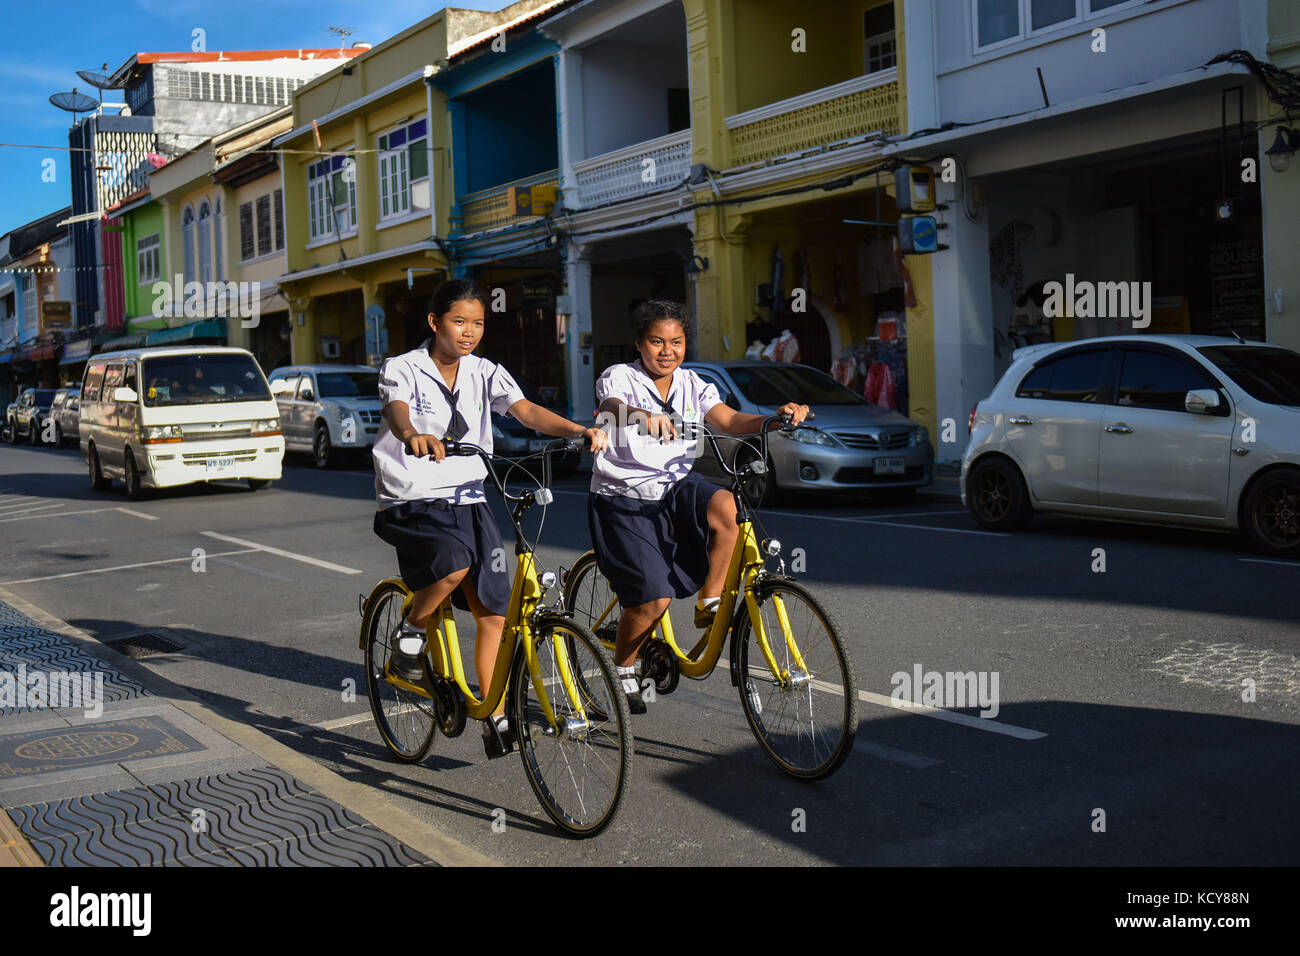 Beijing, Thailand. 5th Oct, 2017. Local students ride ofo sharing bikes at a commercial area in Phuket, Thailand, Oct. 5, 2017. China's dock-less bike-sharing company ofo provided more than 1,000 bikes in Phuket's key locations in late September and offered a 1-month free trial without deposit fee. Now the bike-sharing service has benefited local residents and tourists. Ofo's regular service fee will be charged at 5 Baht per 30 minutes usage, with a deposit fee of 99 Baht. Credit: Li Mangmang/Xinhua/Alamy Live News Stock Photo